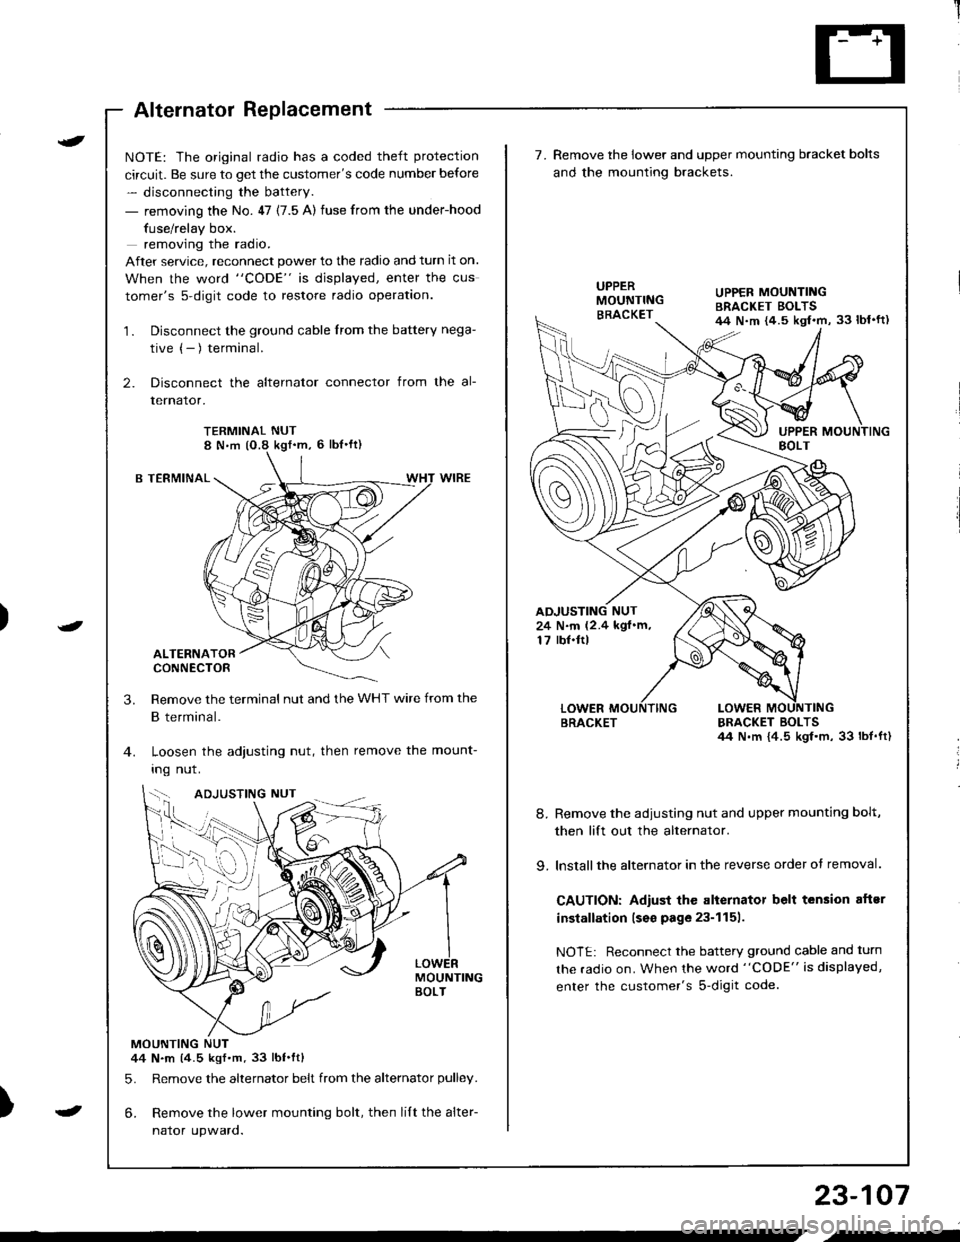 HONDA INTEGRA 1998 4.G Workshop Manual Alternator Replacement
)
t
-
NOTE: The original radio has a coded theft protection
circuit. Be sure to get the customers code number before
- disconnecting the battery.
- removing the No. 47 (7.5 A) 